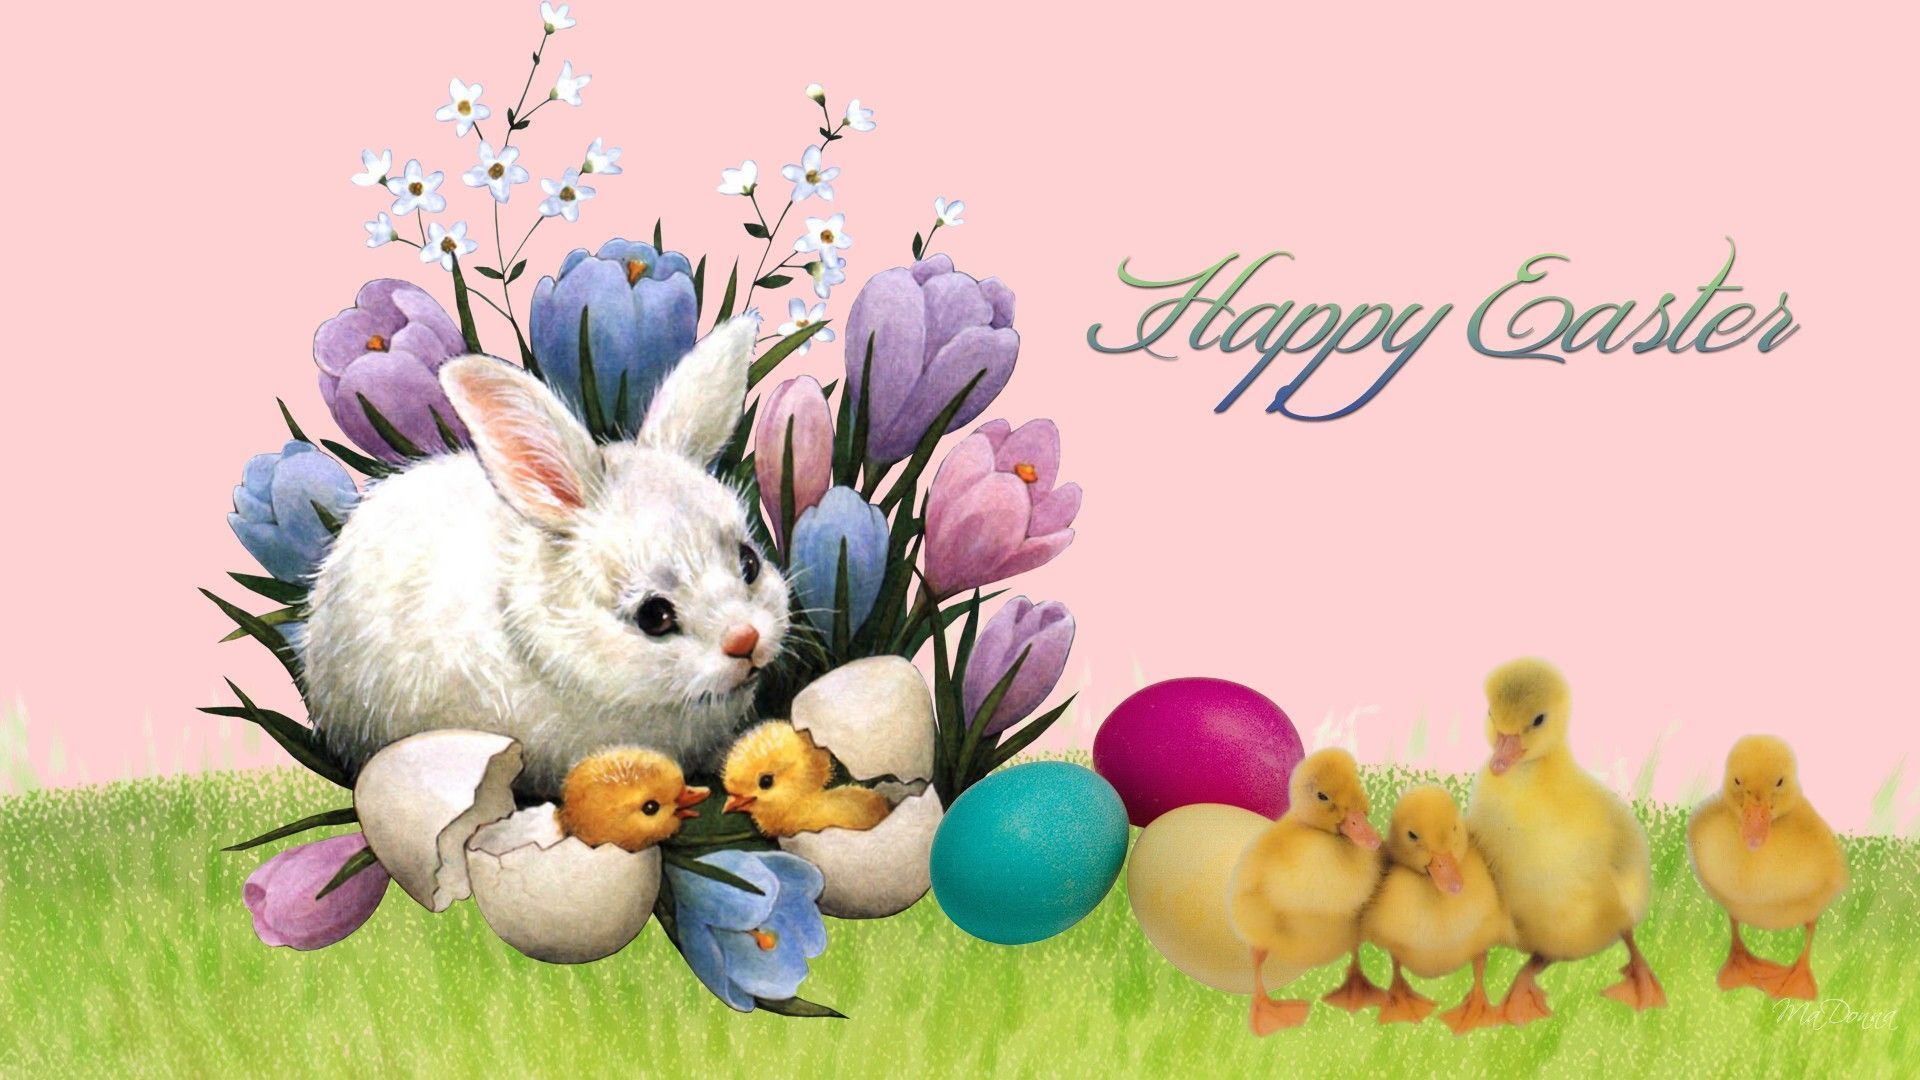 Easter Bunny HD Wallpaper Free. Happy easter wallpaper, Easter bunny image, Easter wallpaper